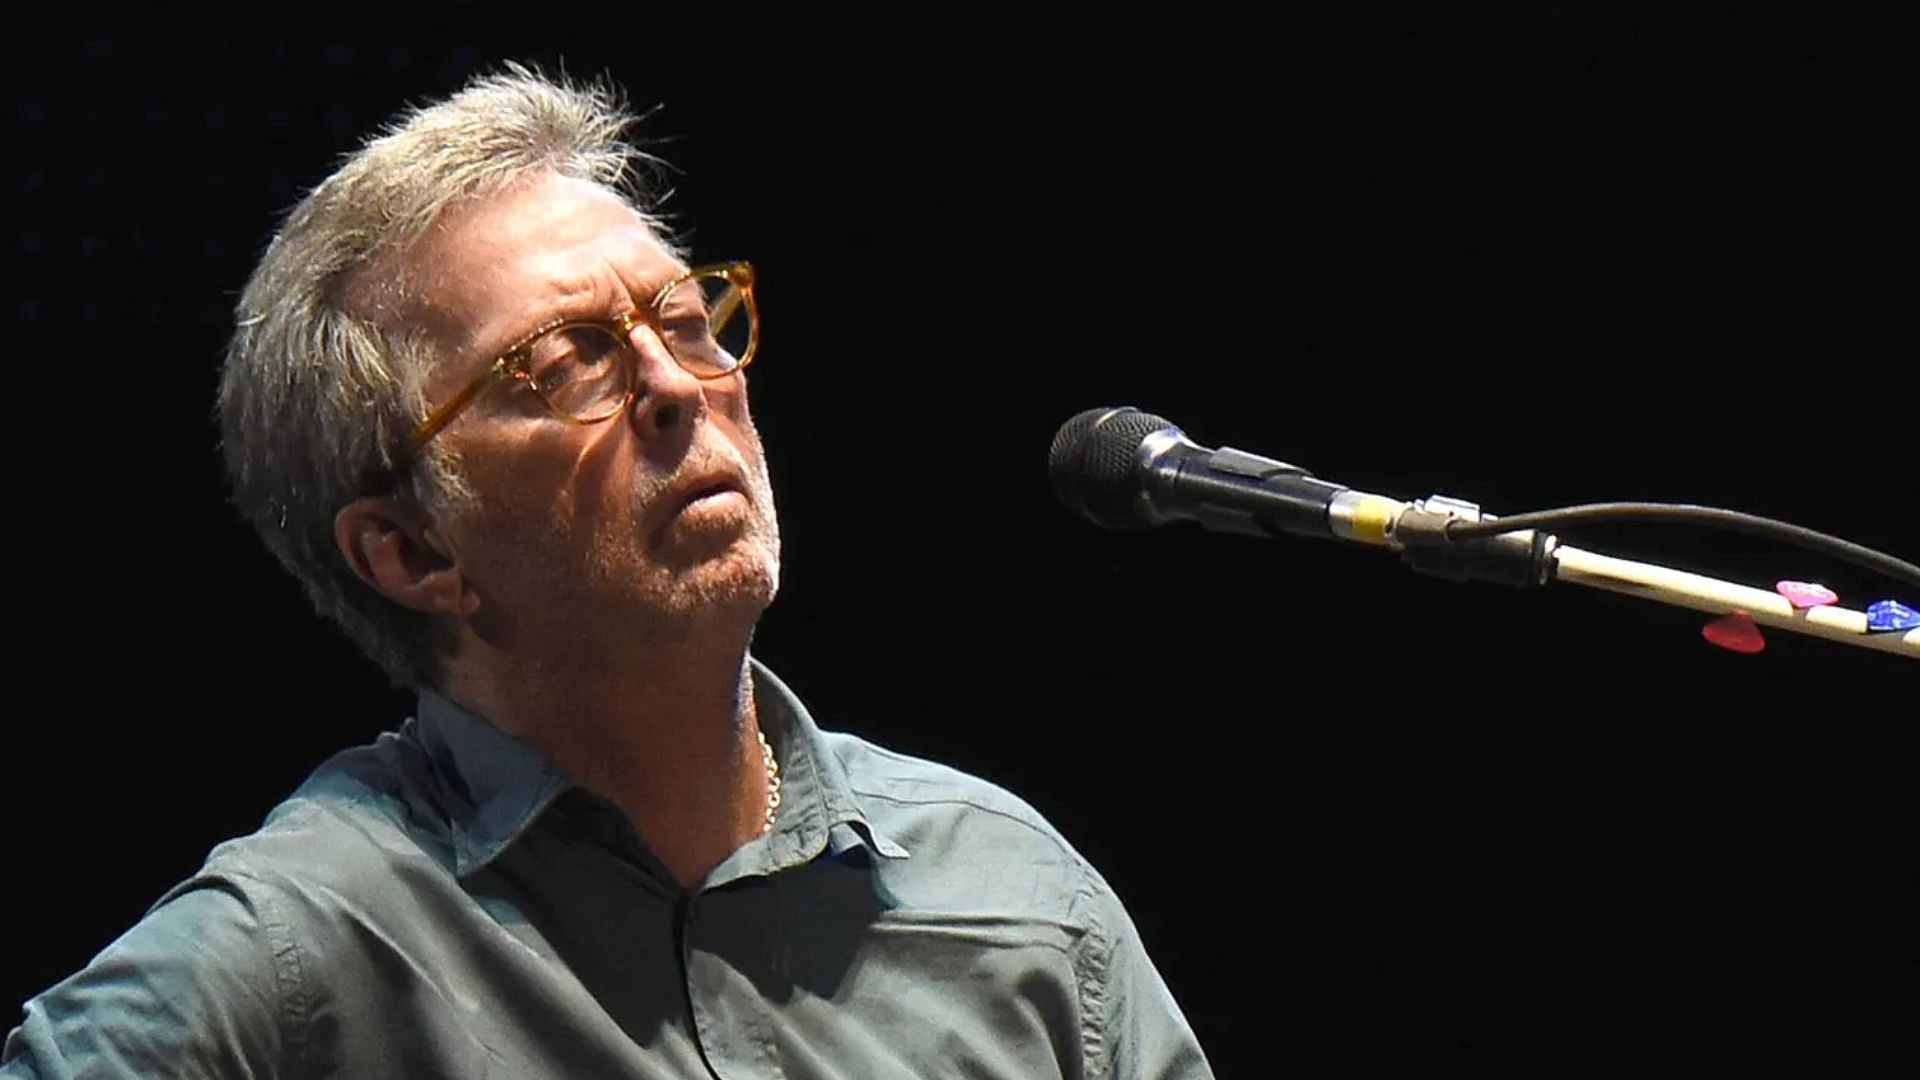 Eric Clapton is a popular musician. (Image via Kevin Mazur/Getty Images)